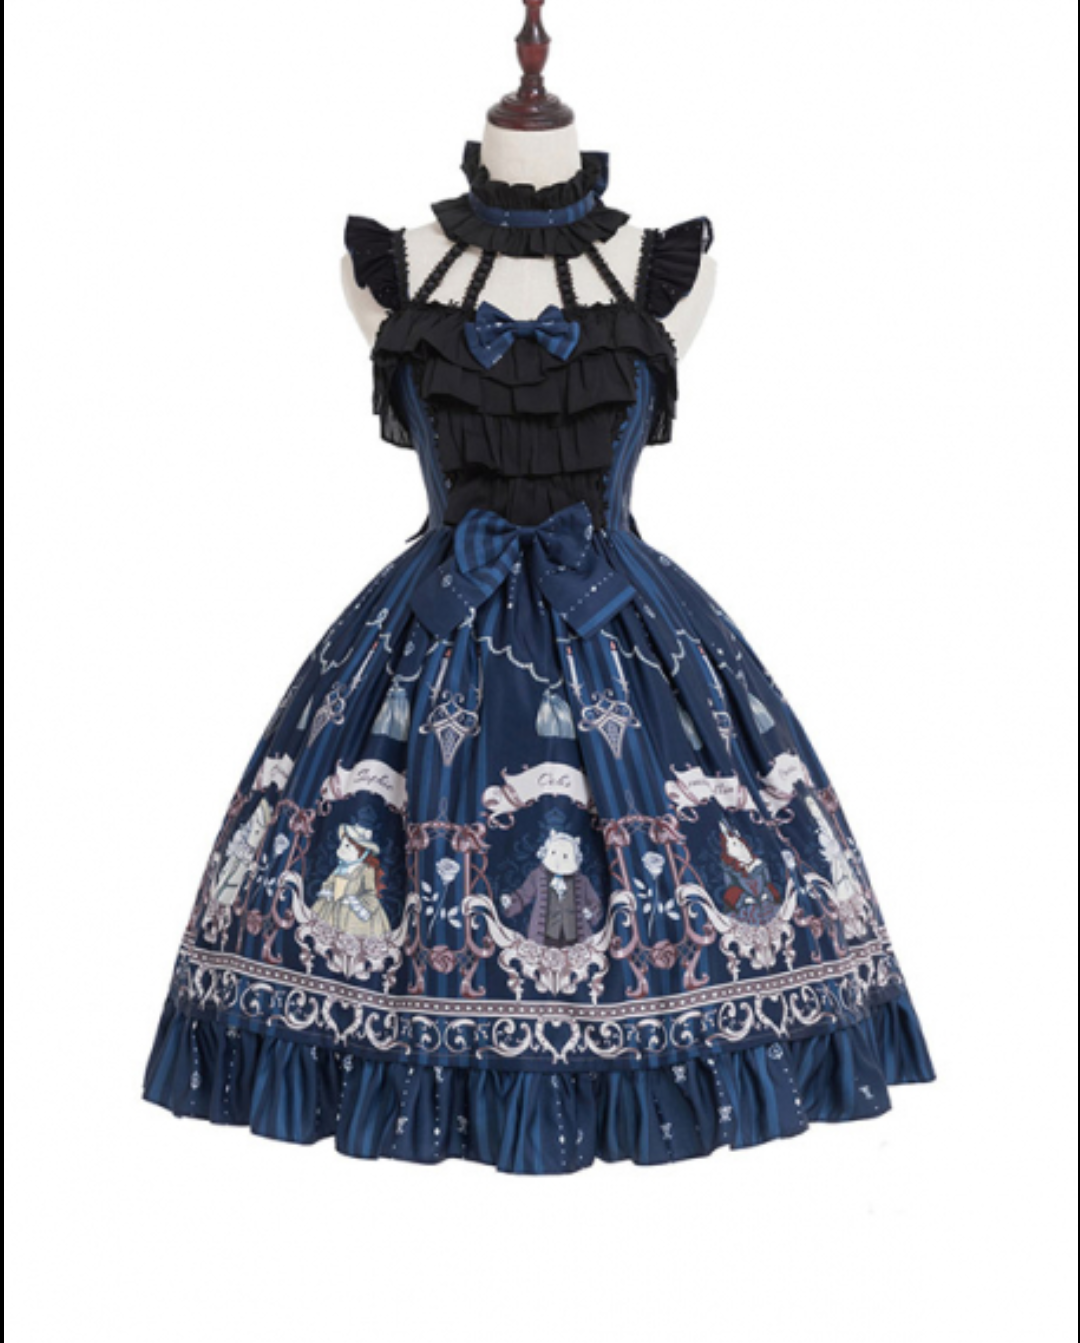 Blue dress with a ruffled collar and mice people around the skirt